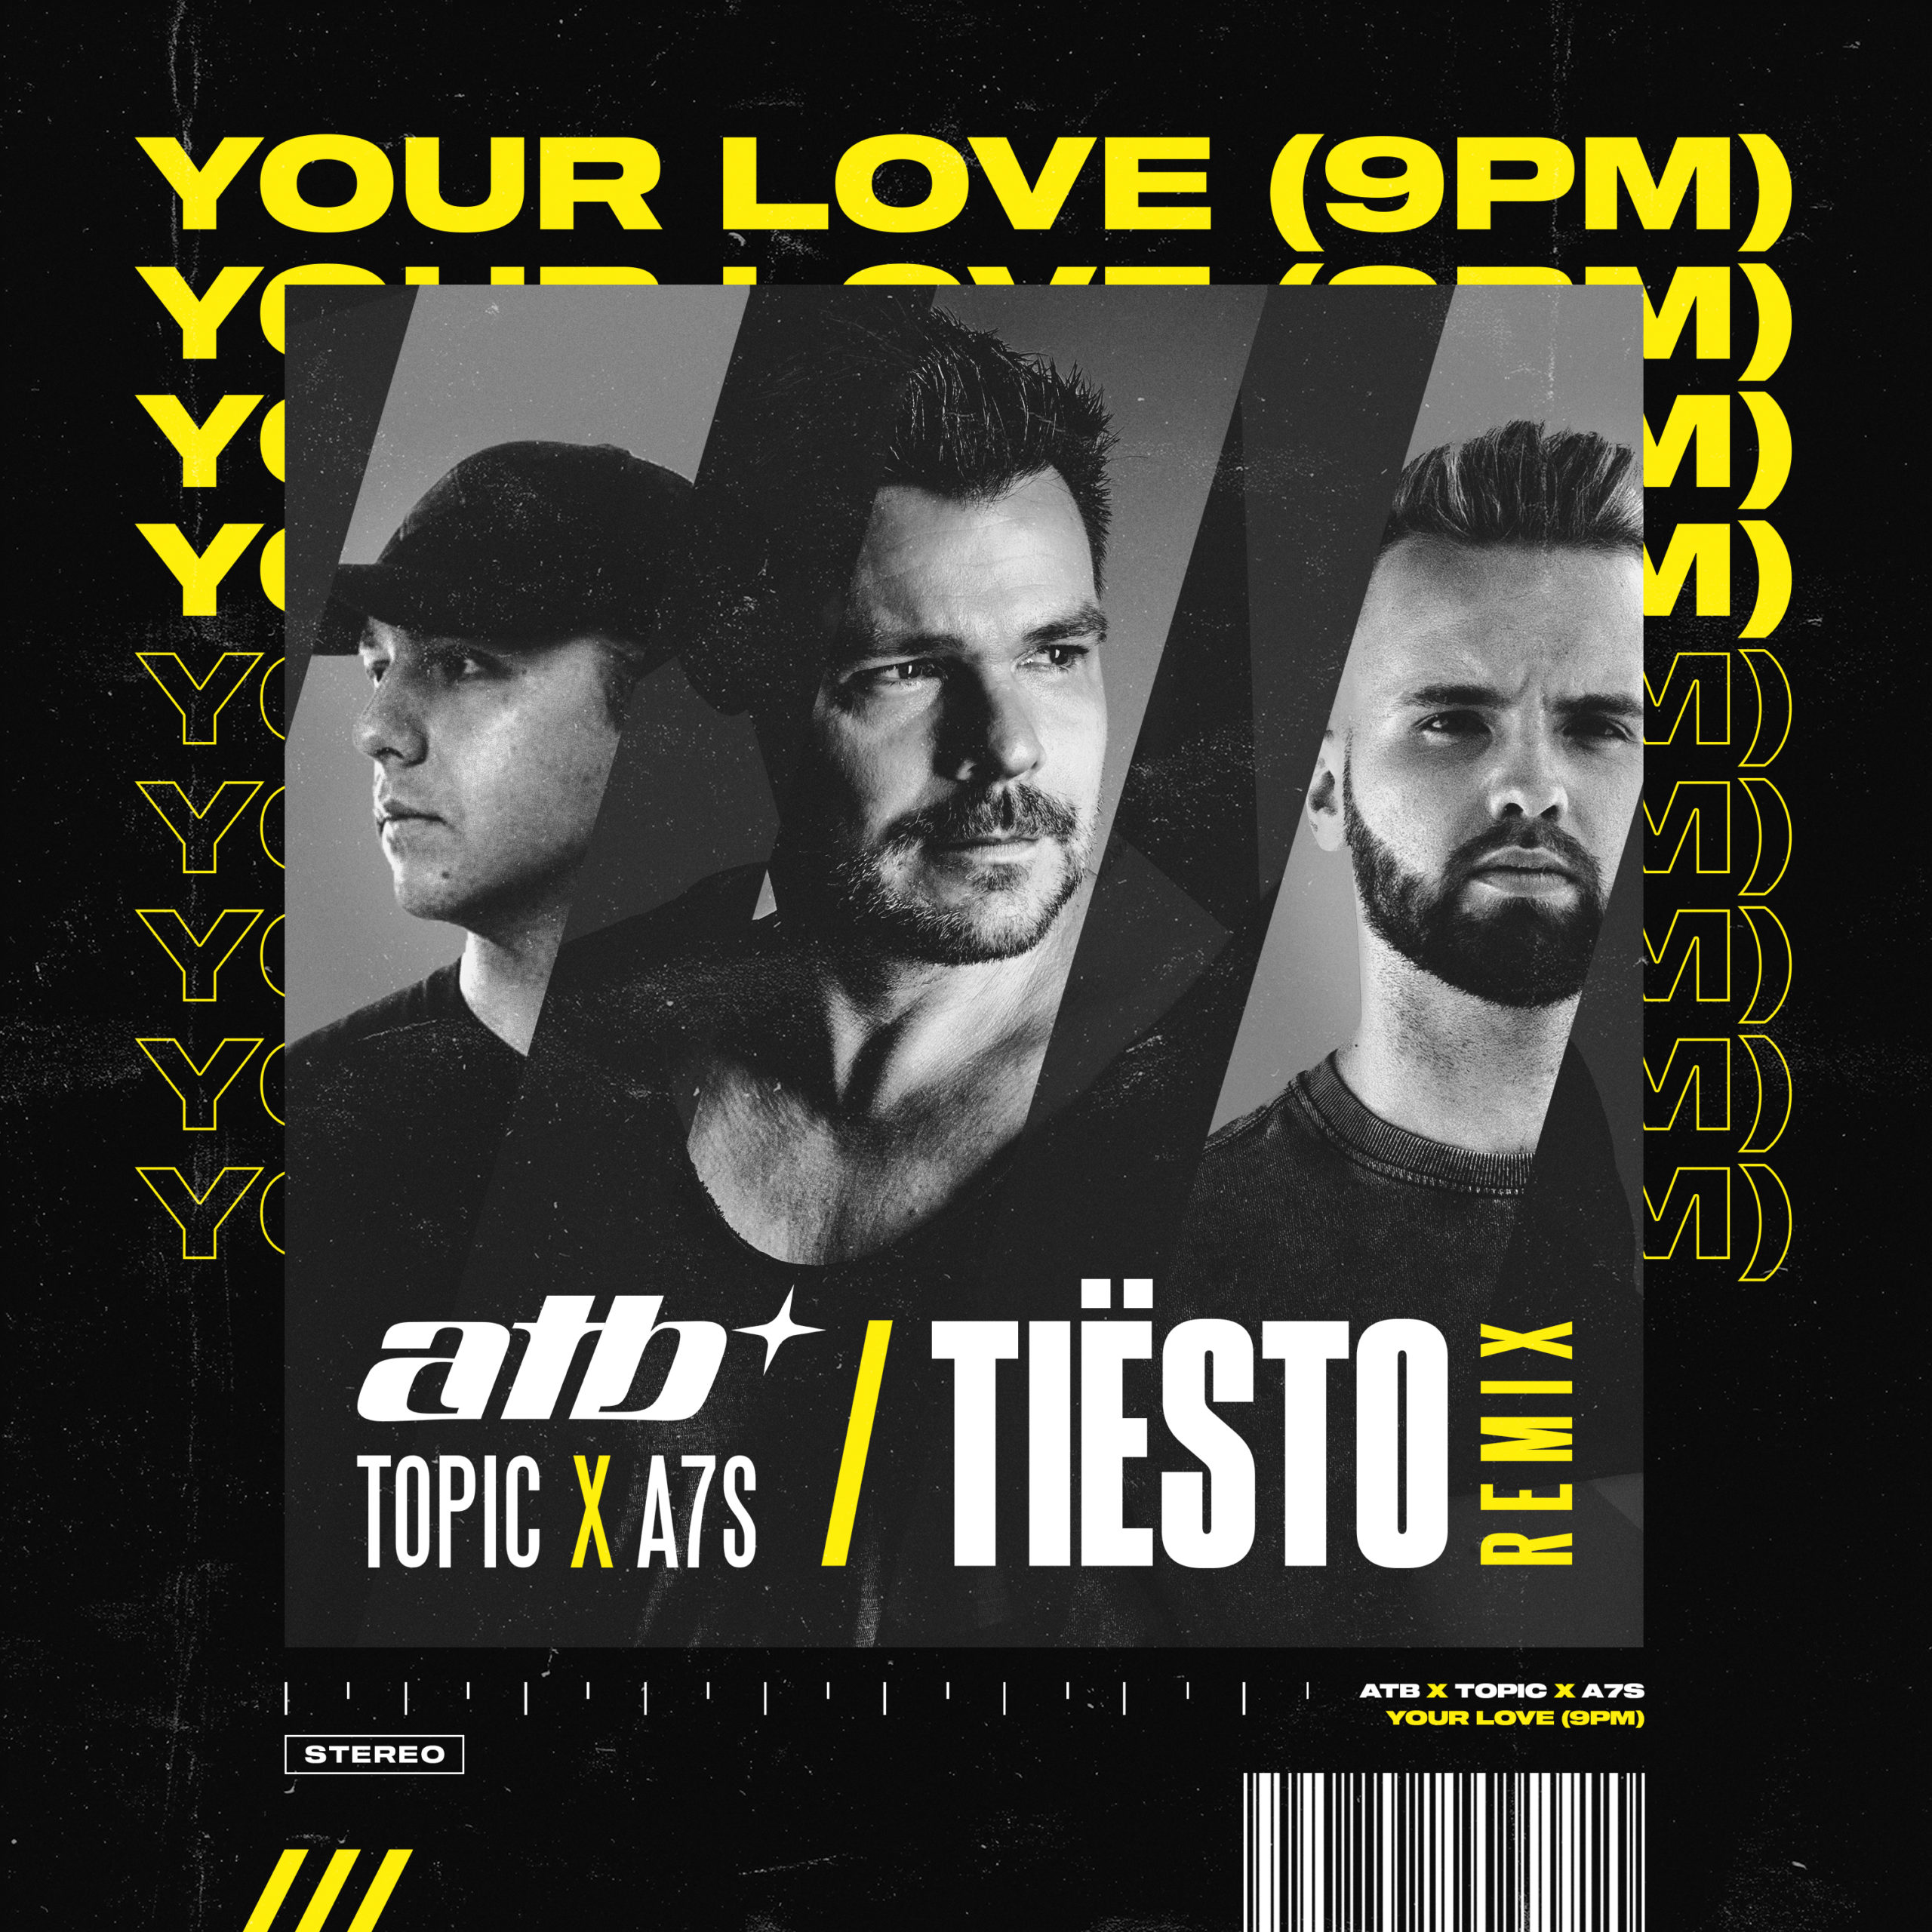 Atb topic your. ATB - your Love (9pm). ATB, topic, a7s - your Love (9pm). Your Love 9 PM Tiesto Remix. ATB X topic x a7s - your Love (9pm).